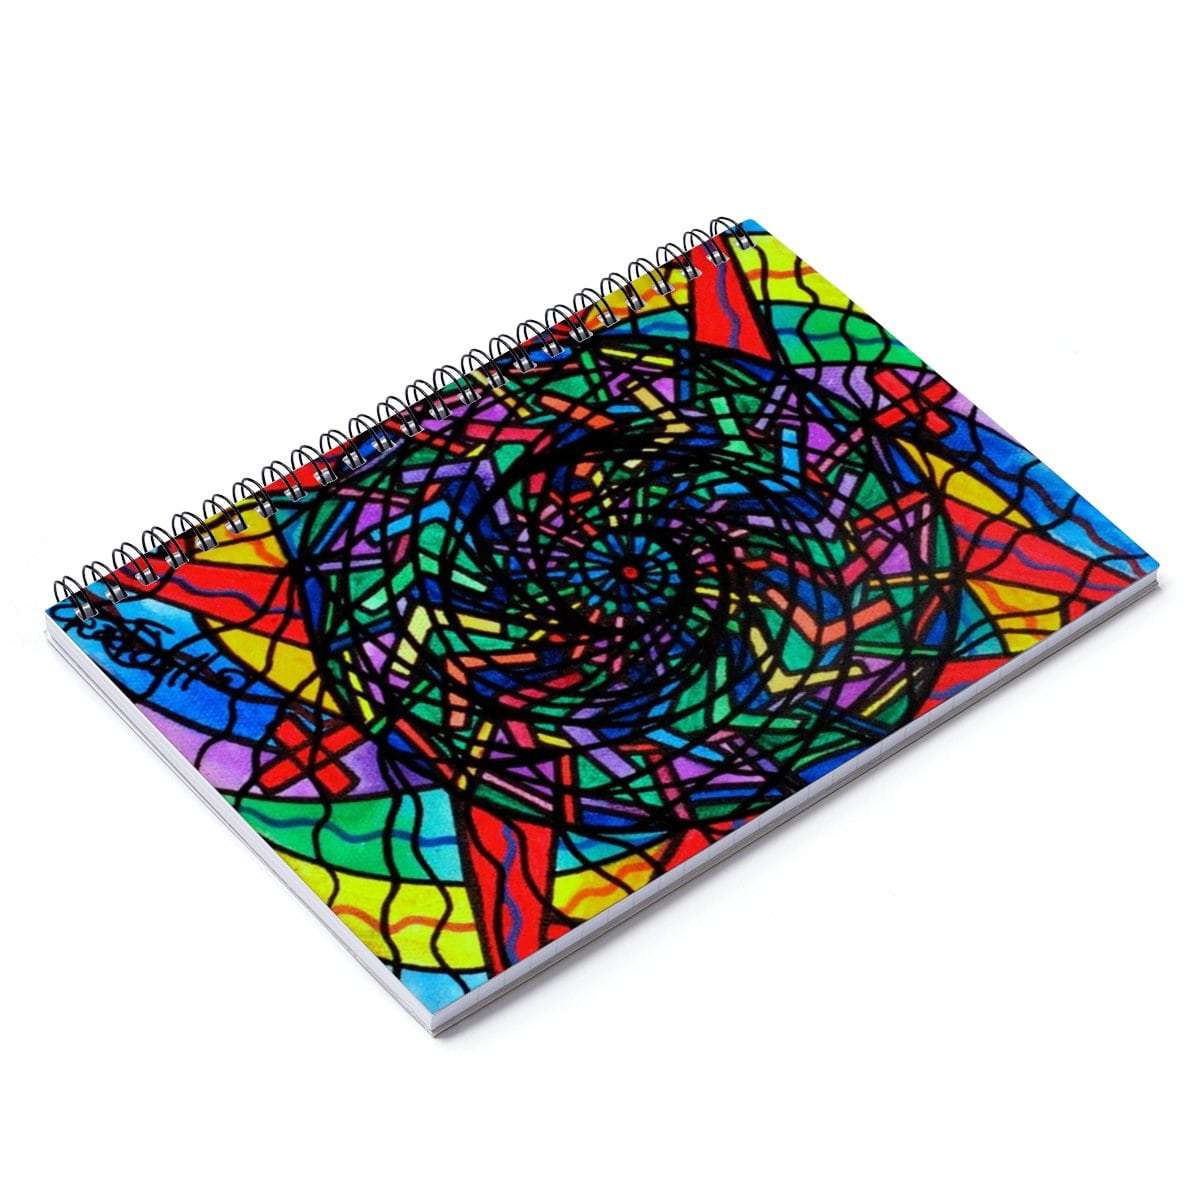 the-one-place-to-find-cheap-academic-fullfillment-spiral-notebook-online-sale_1.jpg